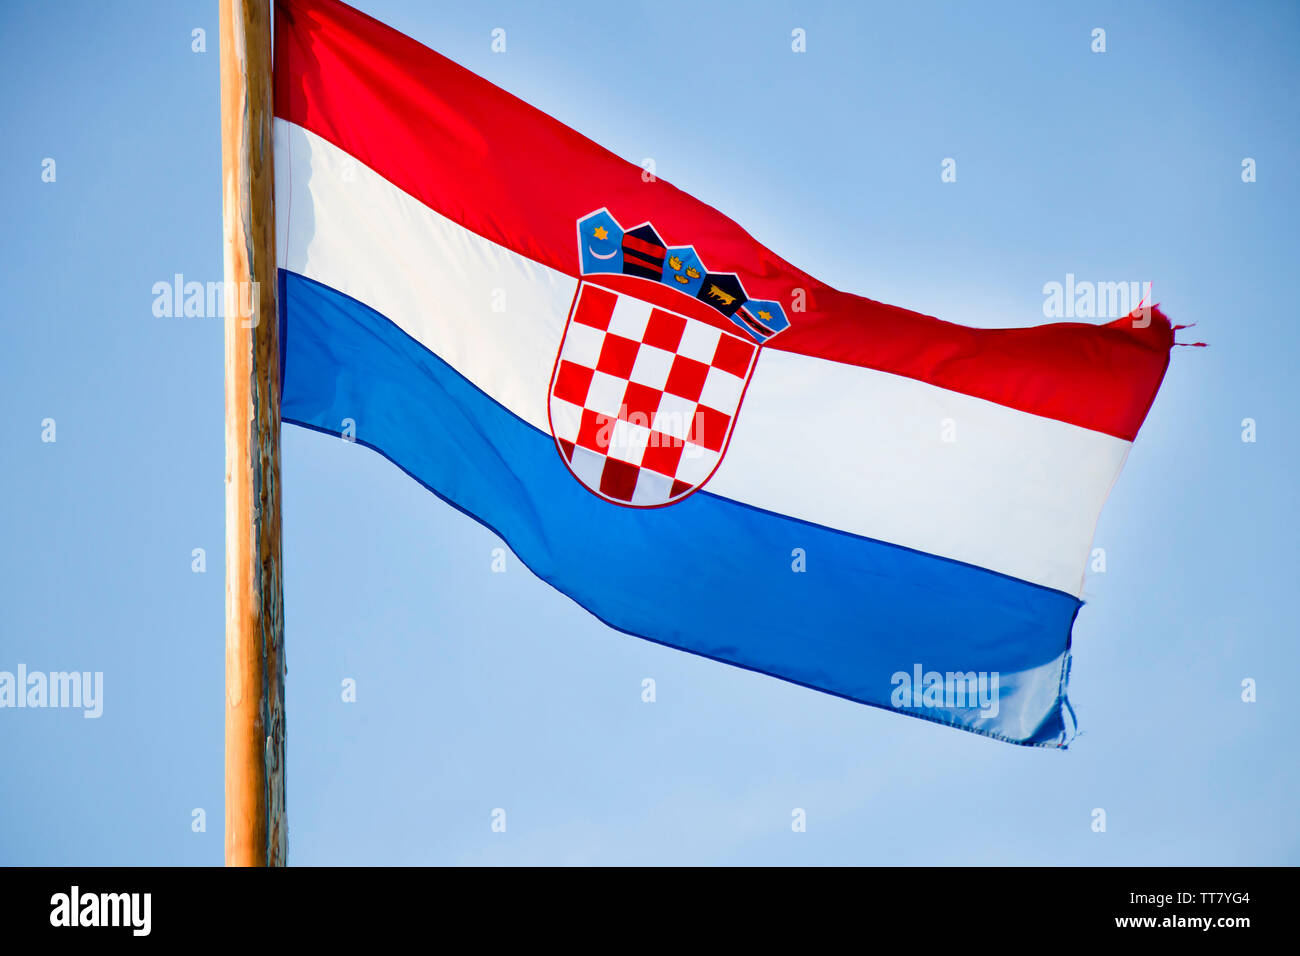 Croatian national flag fluttering on wooden pole against the clear blue sky Stock Photo